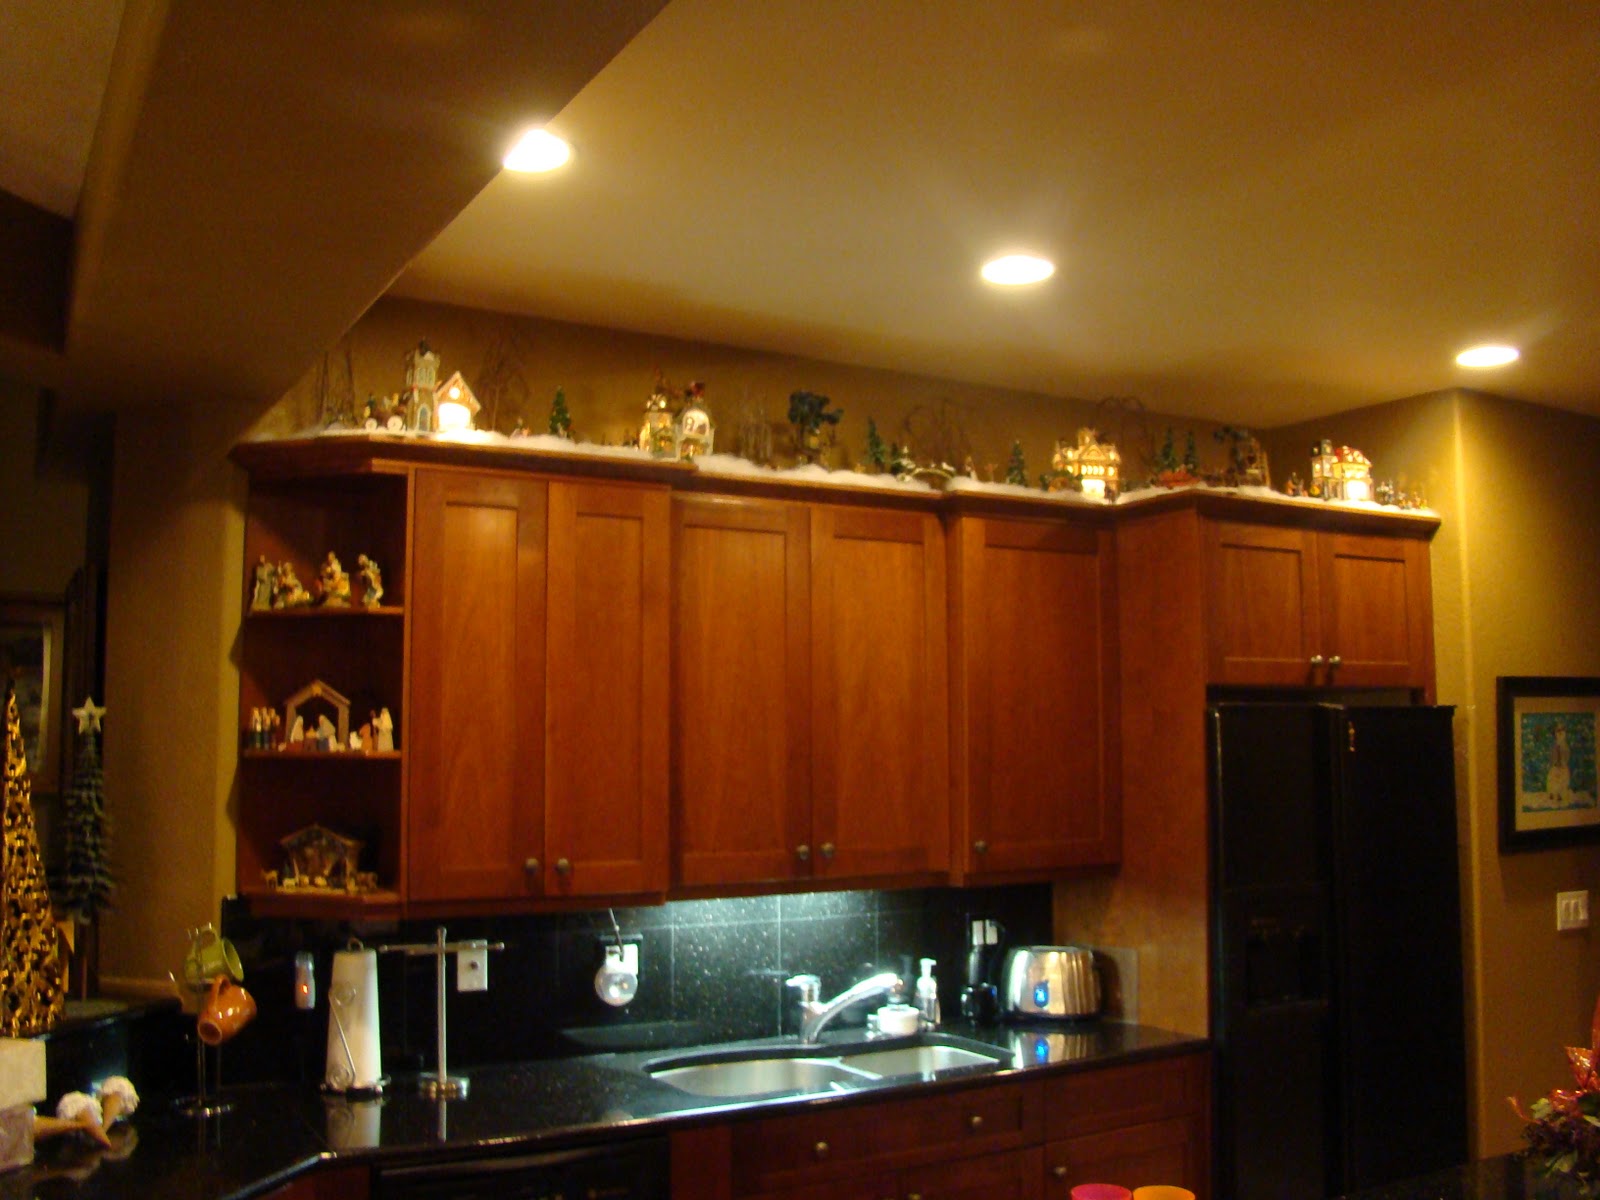 Home Christmas Decoration Christmas Cabinet Top Decorating